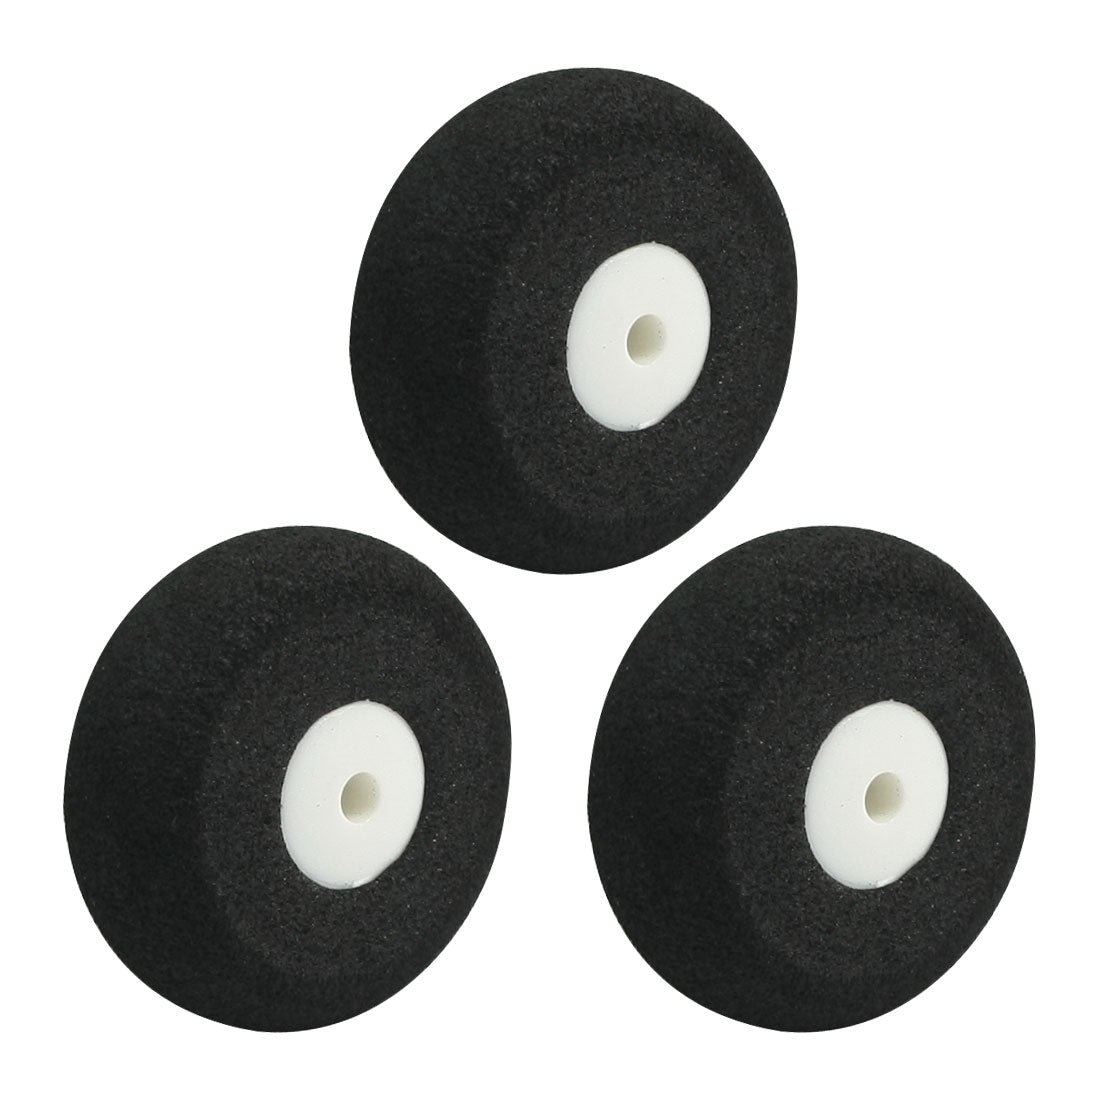 uxcell Uxcell 3pcs RC Model Airplane Super Light Sponge Tire Tail Wheel 25mm 1"